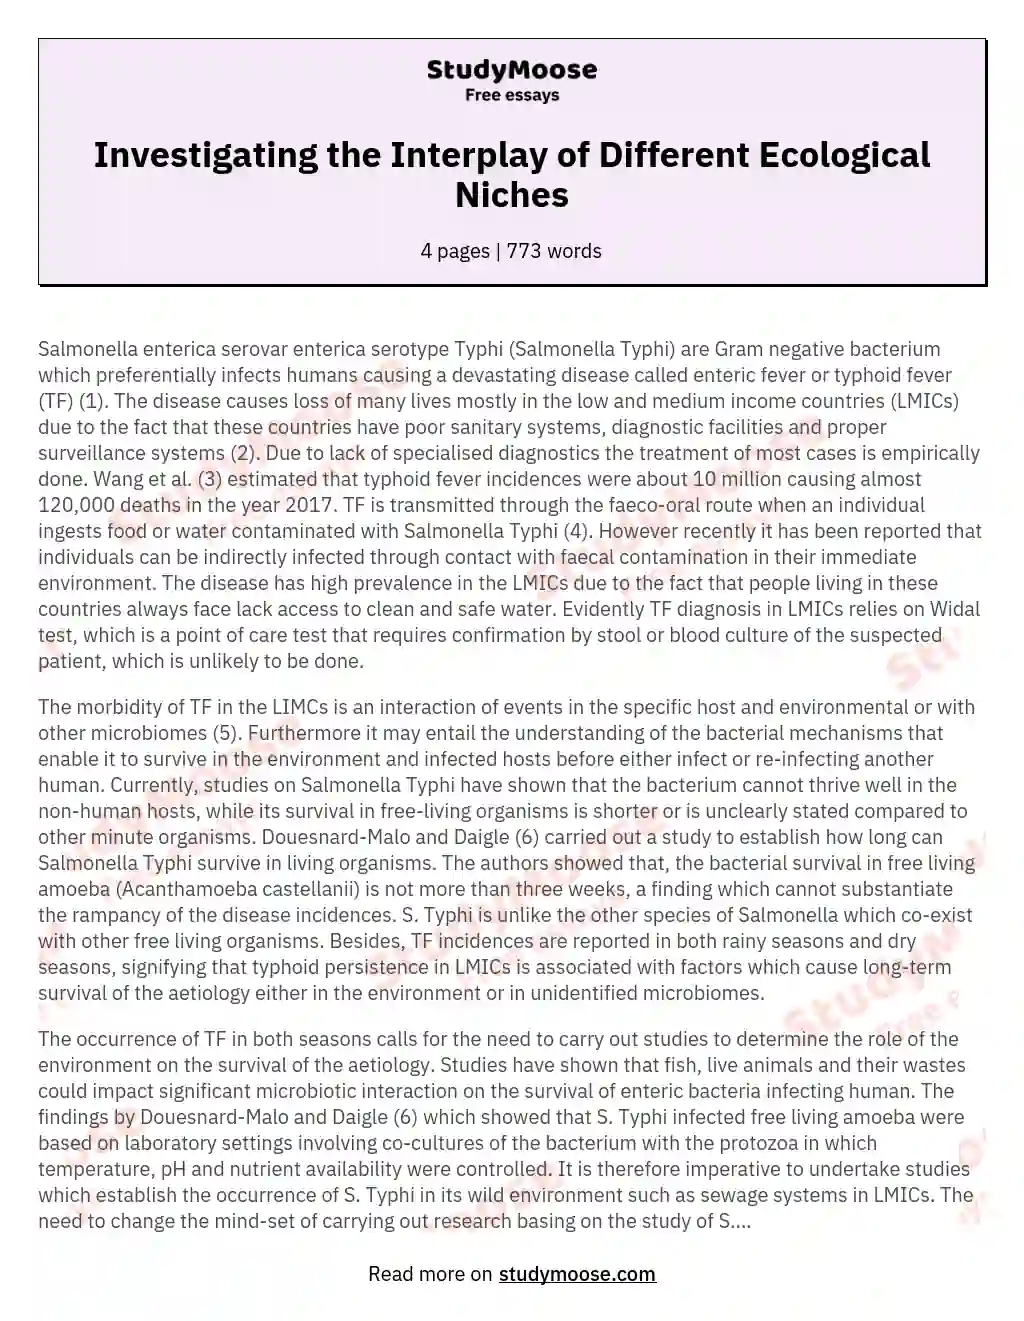 Investigating the Interplay of Different Ecological Niches essay